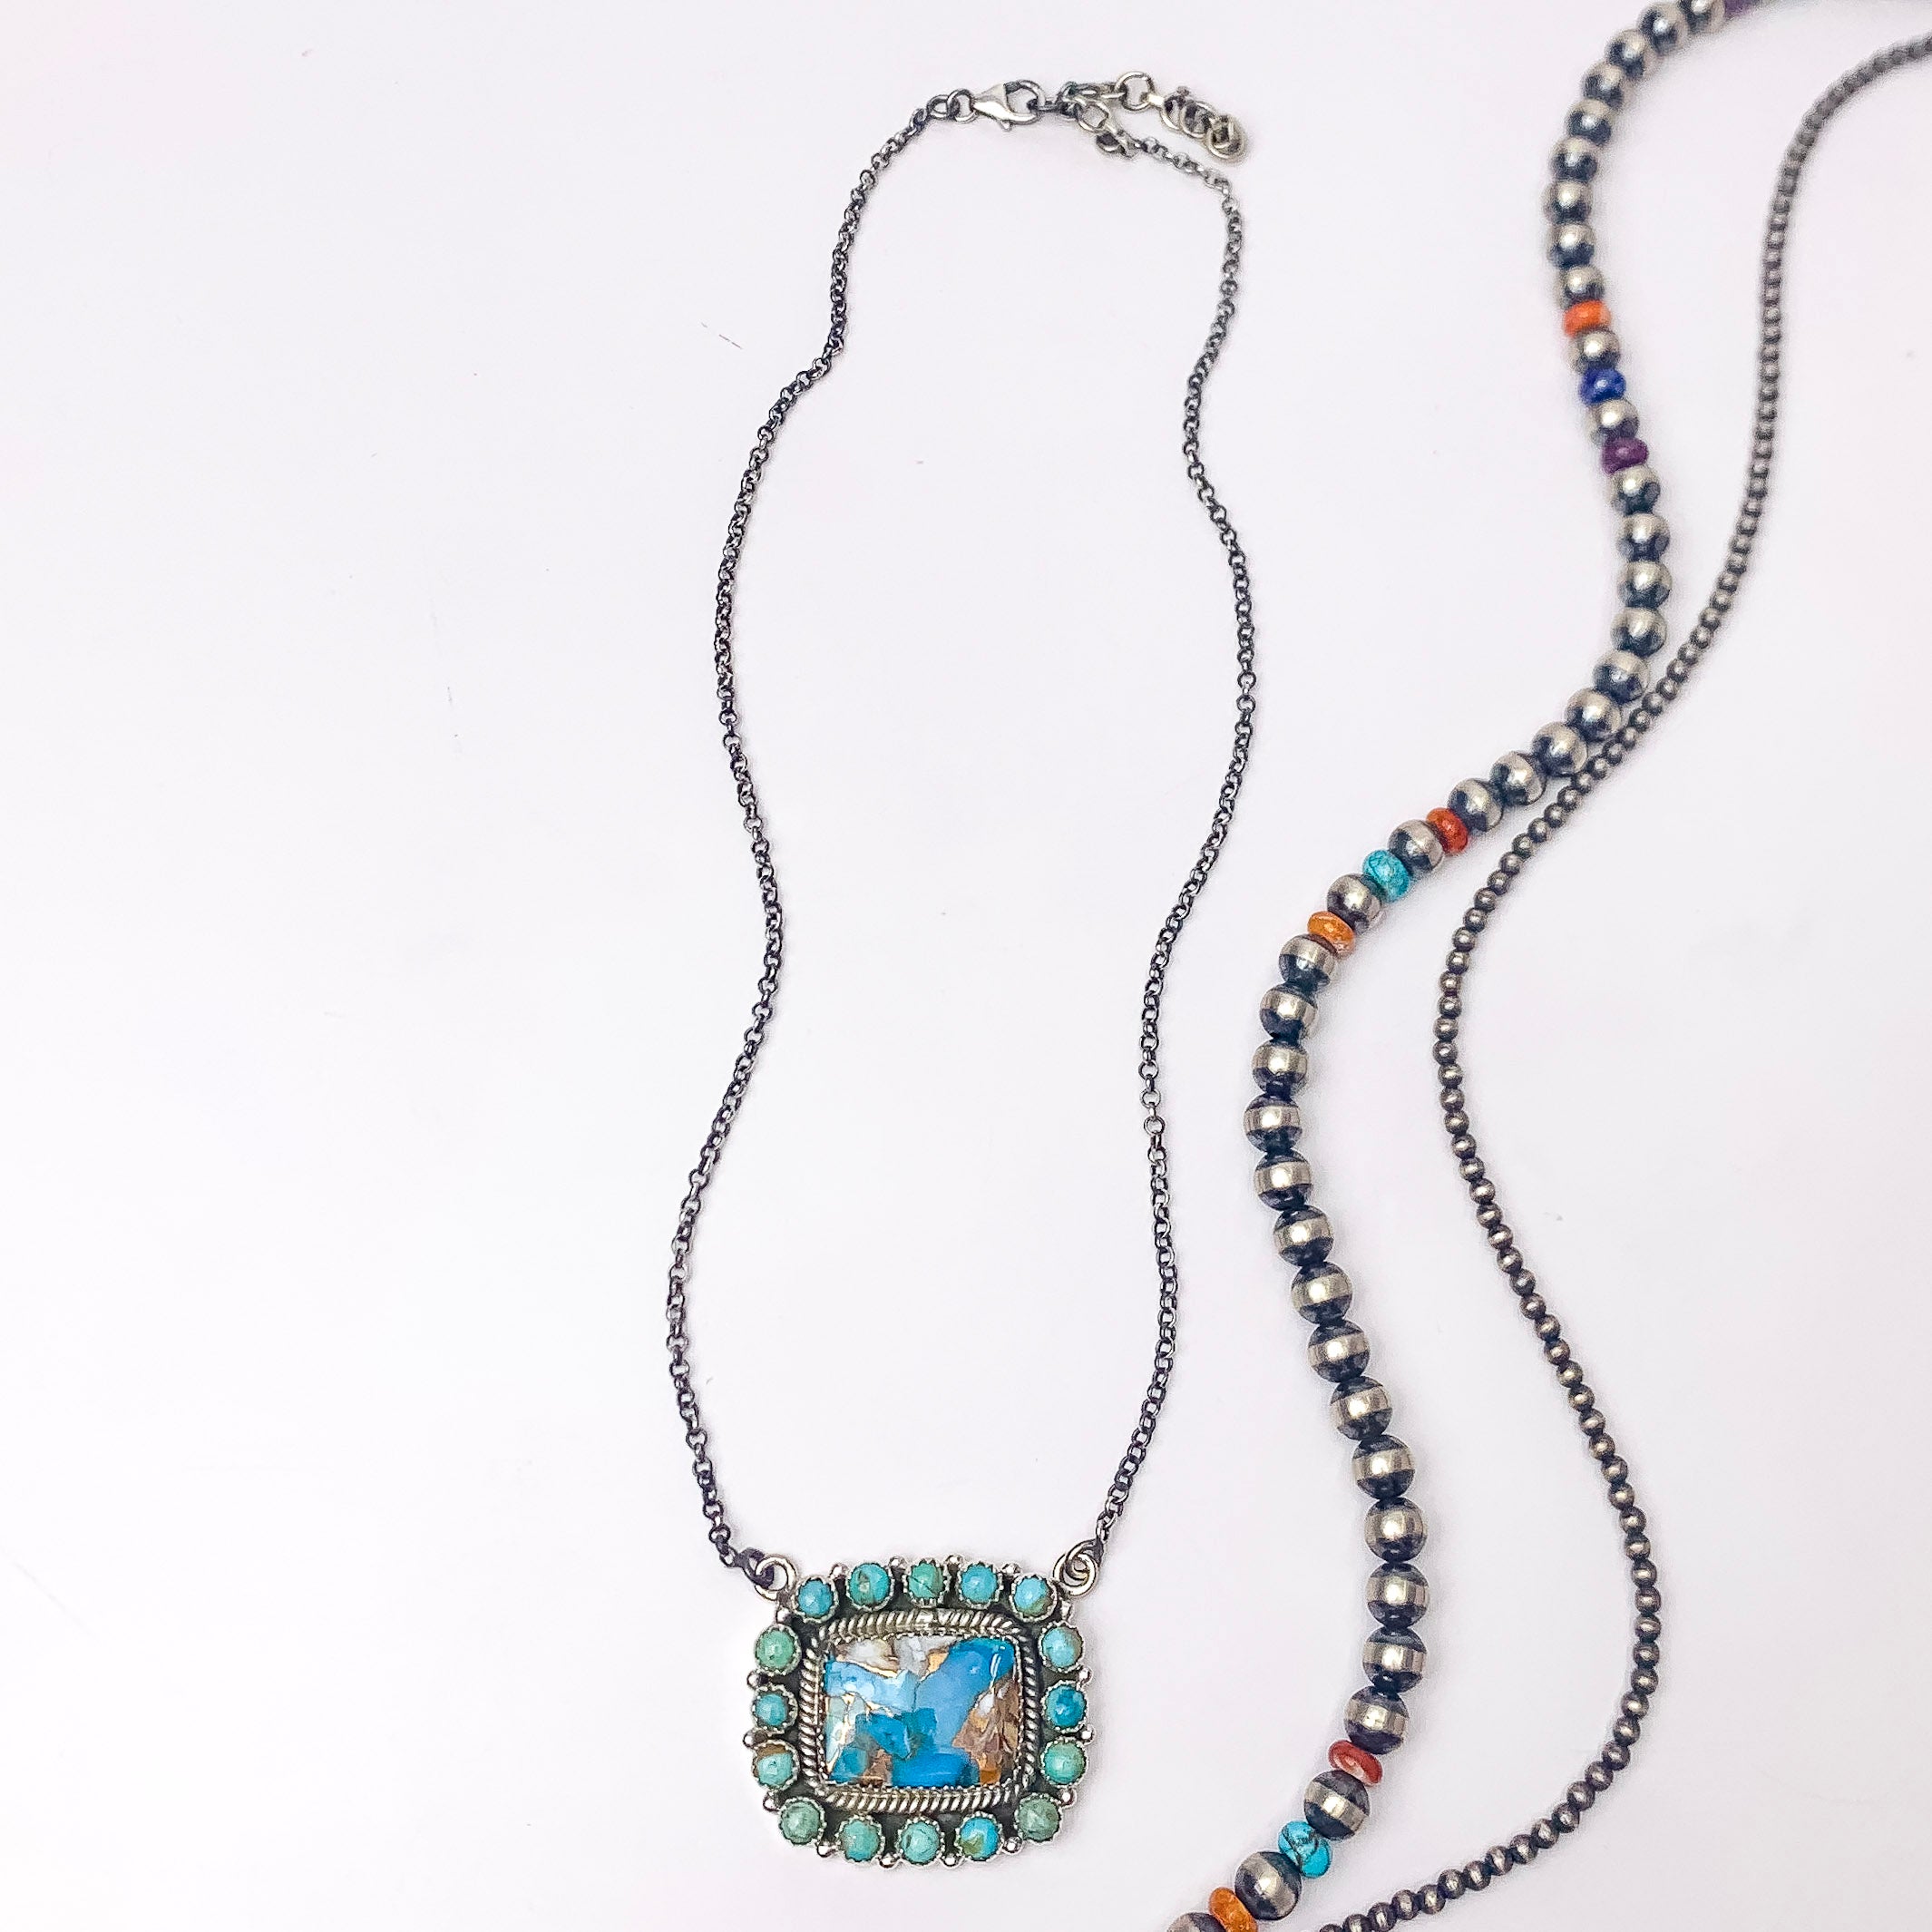 Hada Collection | Handmade Sterling Silver and Turquoise Remix Pendant Necklace - Giddy Up Glamour Boutique